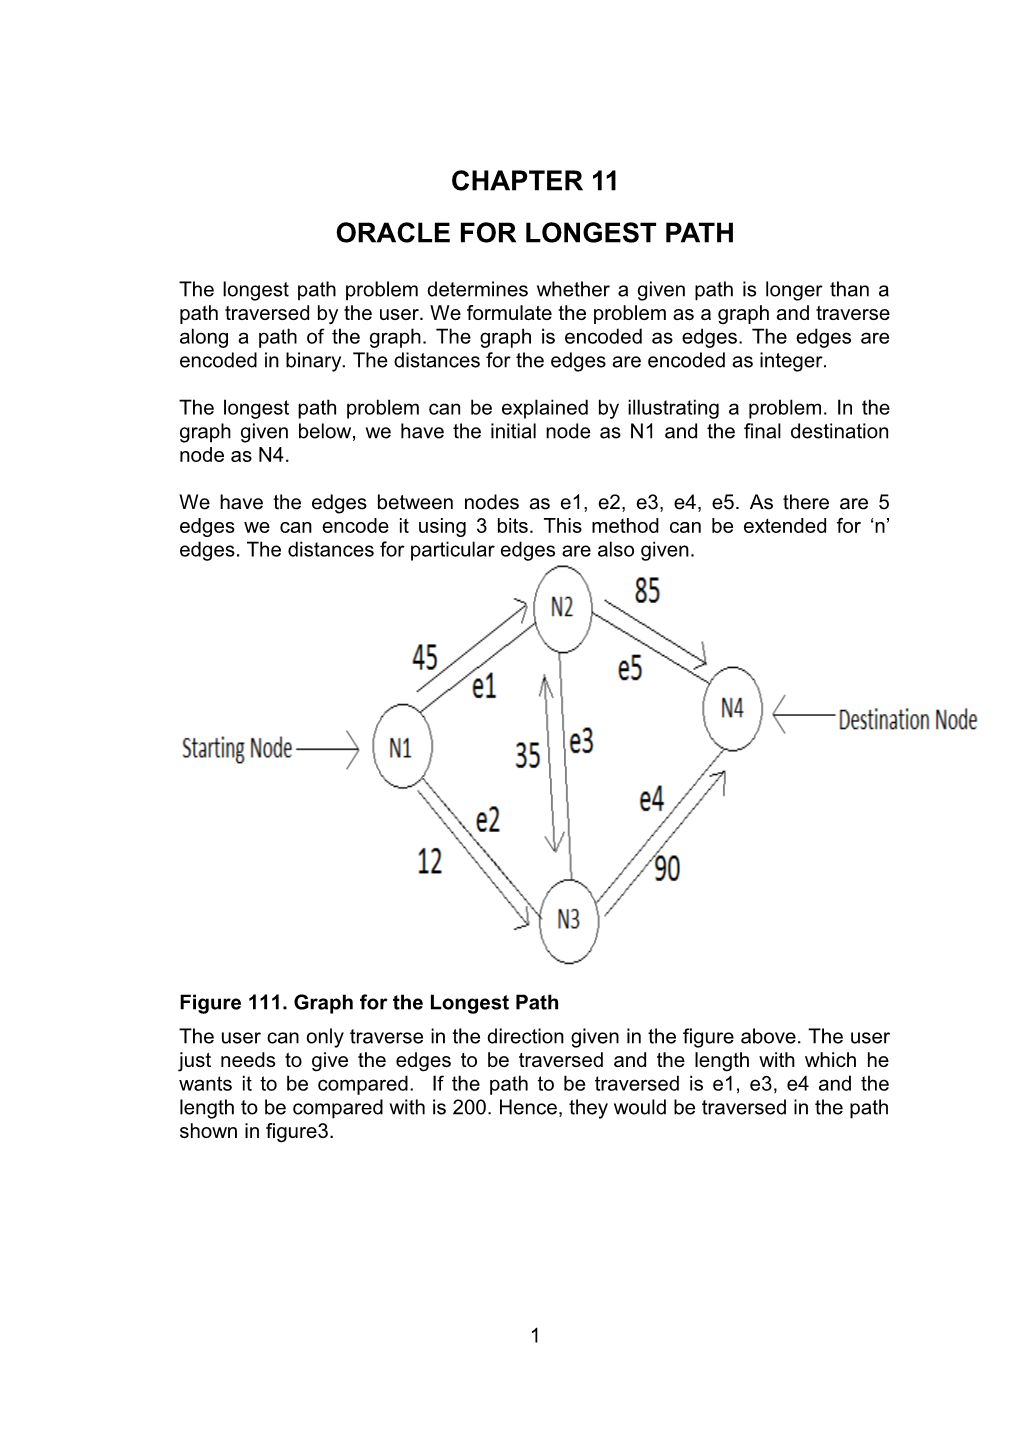 Oracle for Longest Path